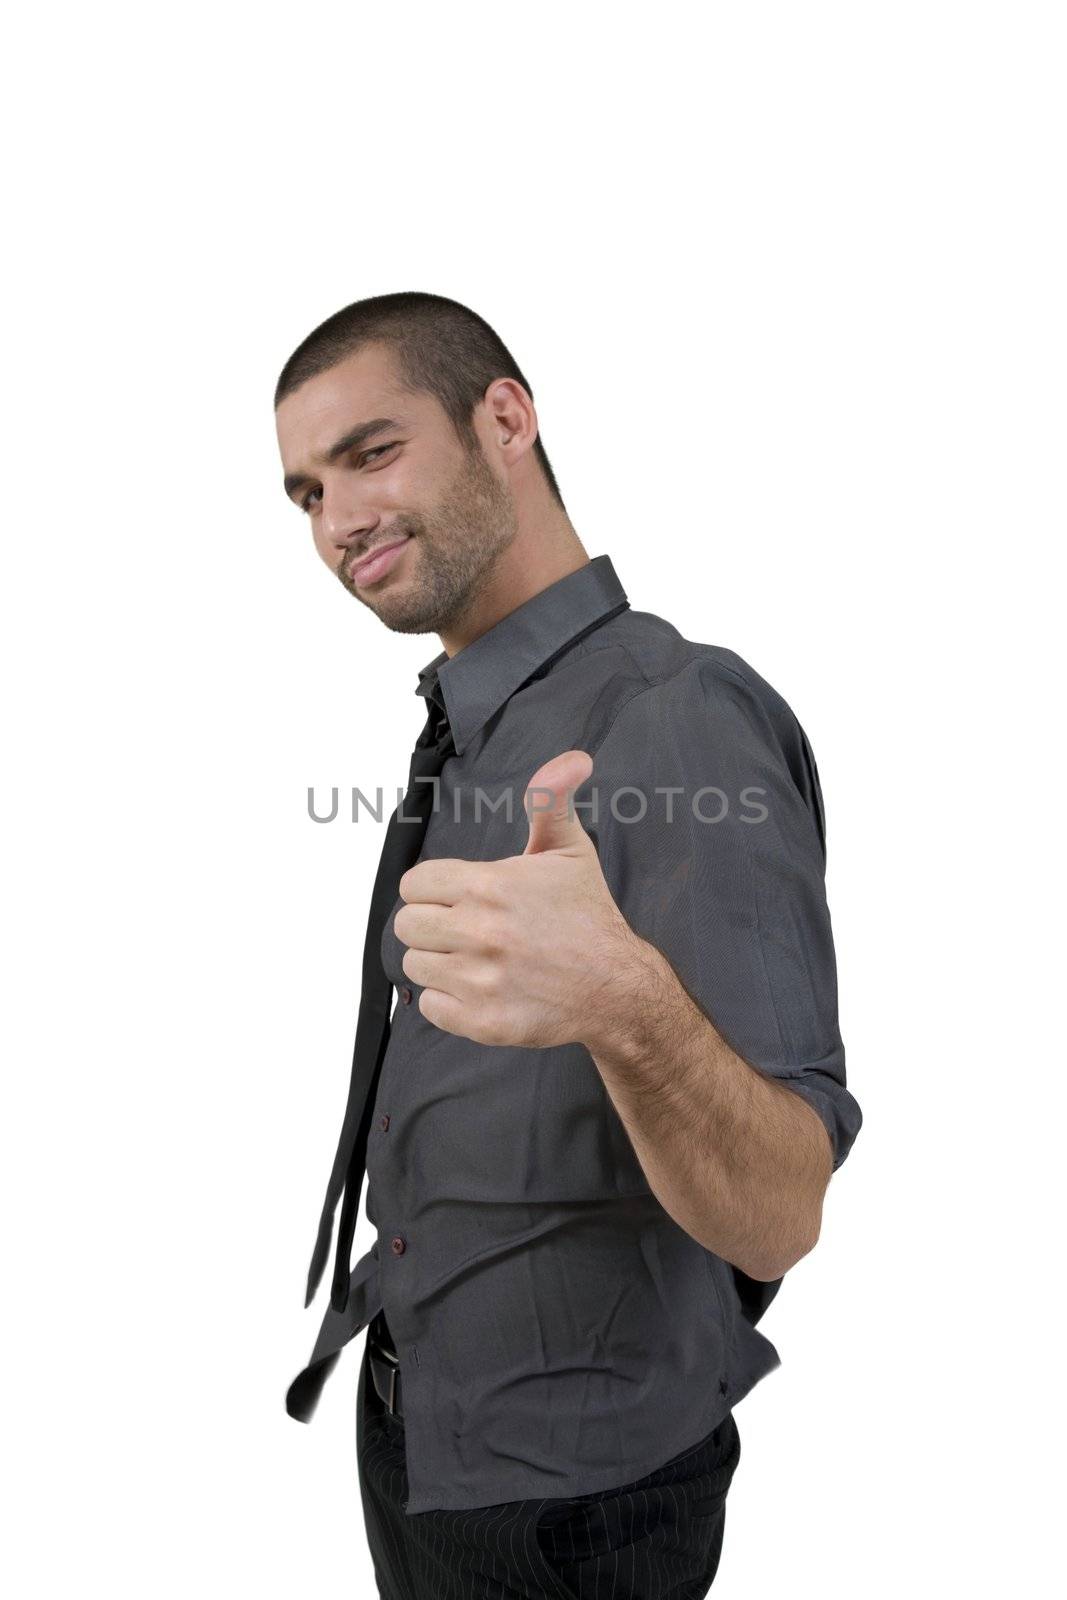 handsome young man with thumbs up on isolated background